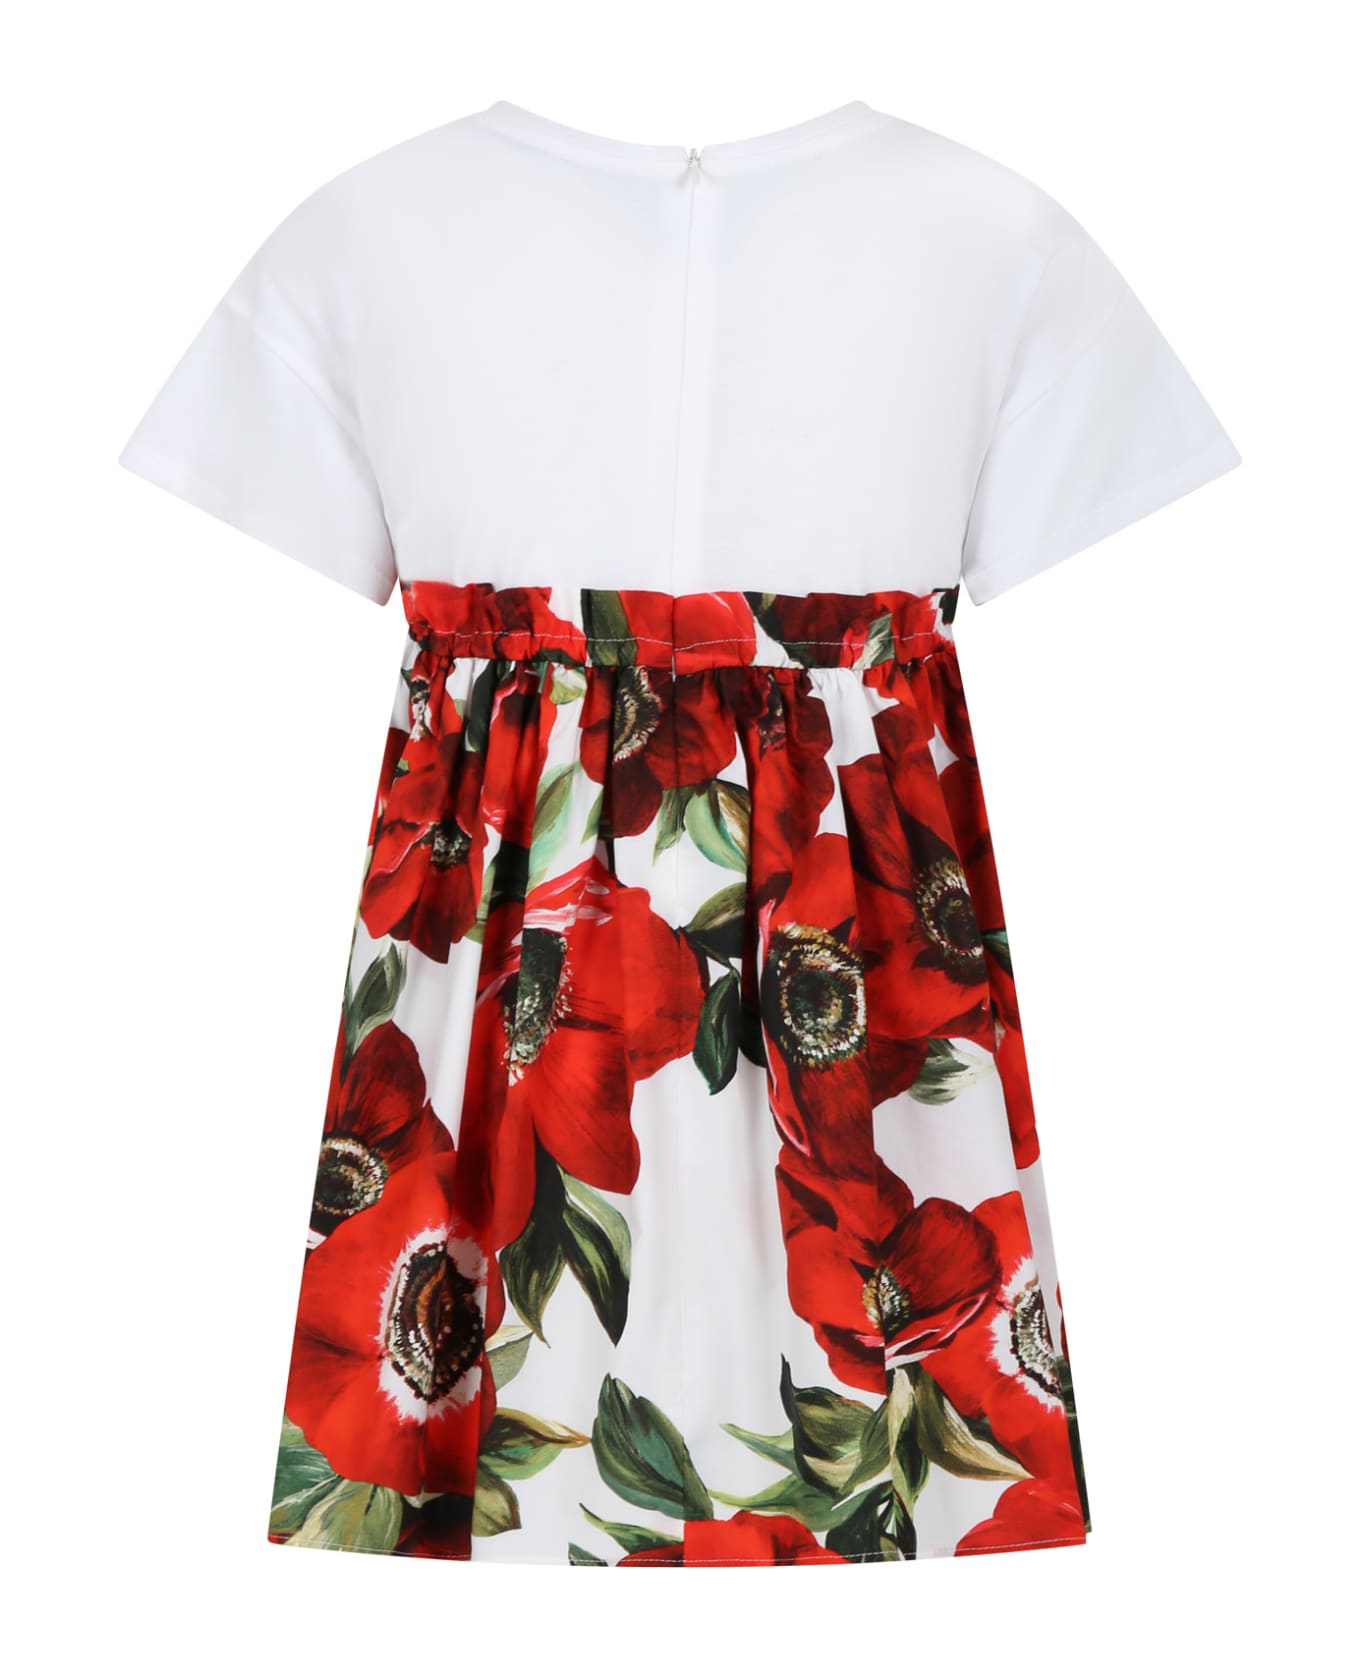 Dolce & Gabbana Casual White Dress For Girl With Poppies And Logo - White